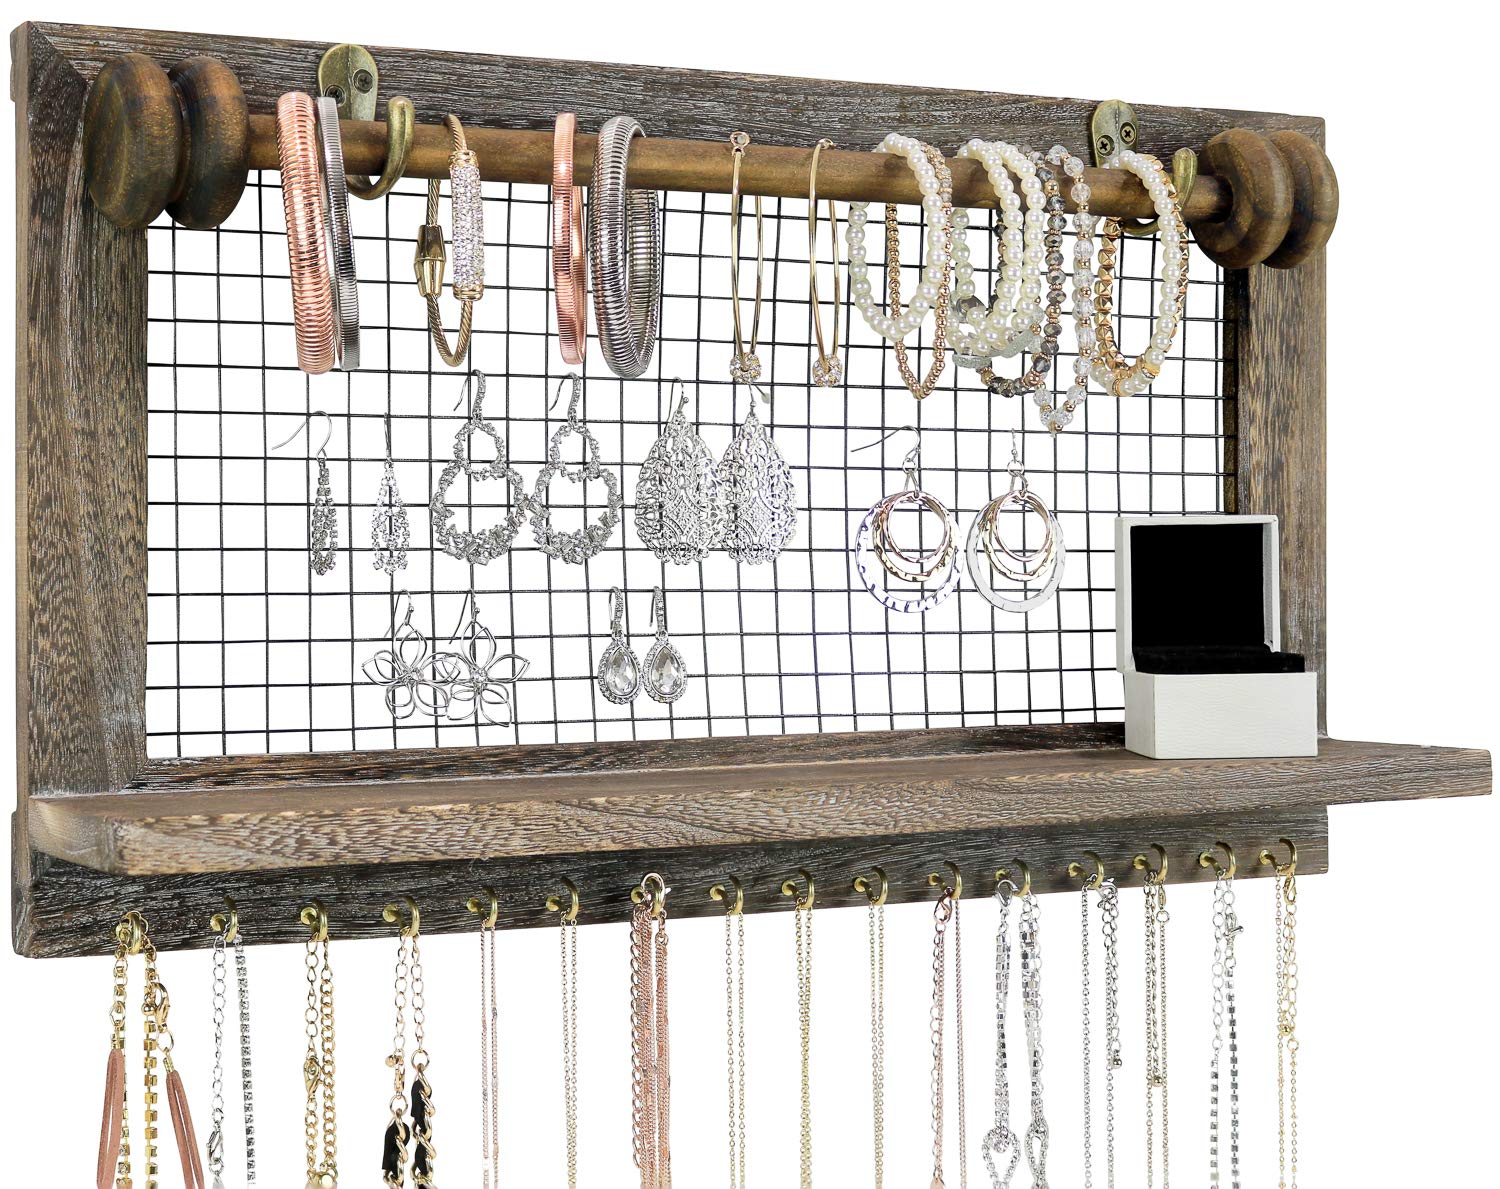 Greenco Rustic Wooden Wall Mount Jewelry Organizer with Removable Hanging Rod and Storage Shelf for Earrings, Bracelets, Necklaces and Accessories, Jewelry Holder, Bracelet Holder, Jewelry Display - image 4 of 6